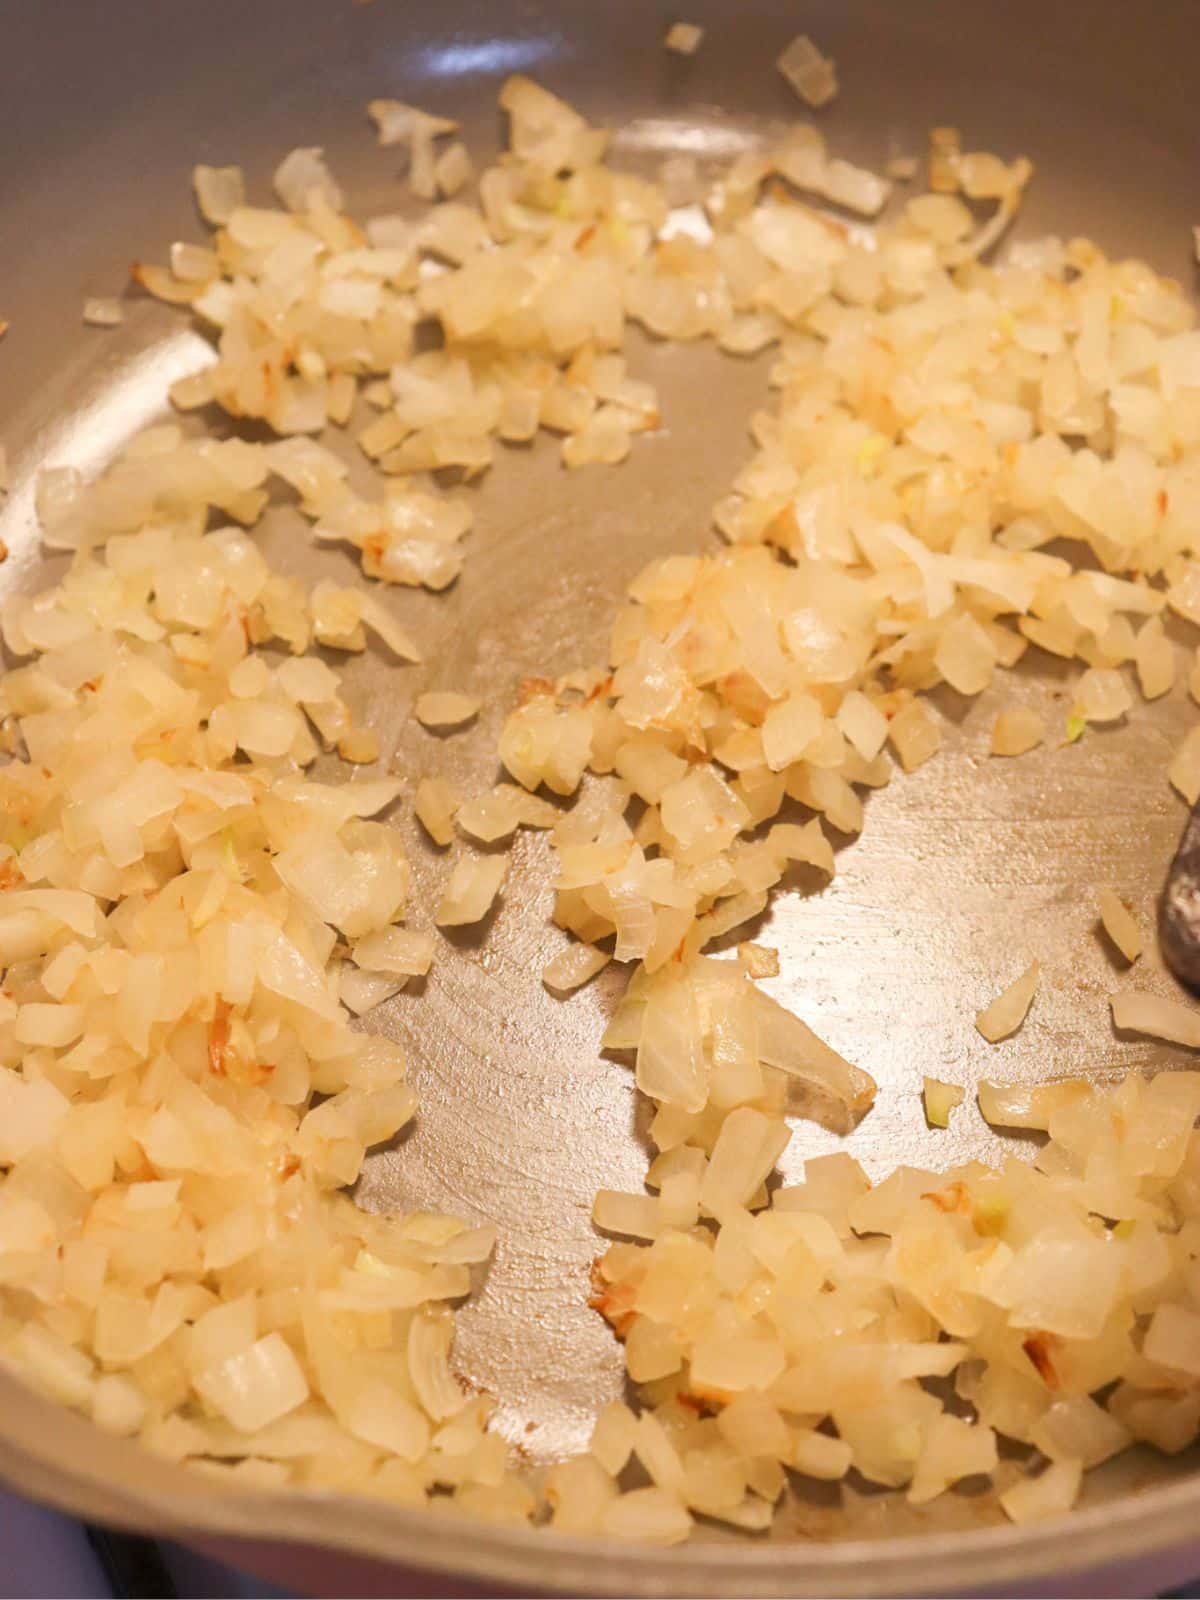 Onions sauteing in a pan on the stove in oil.